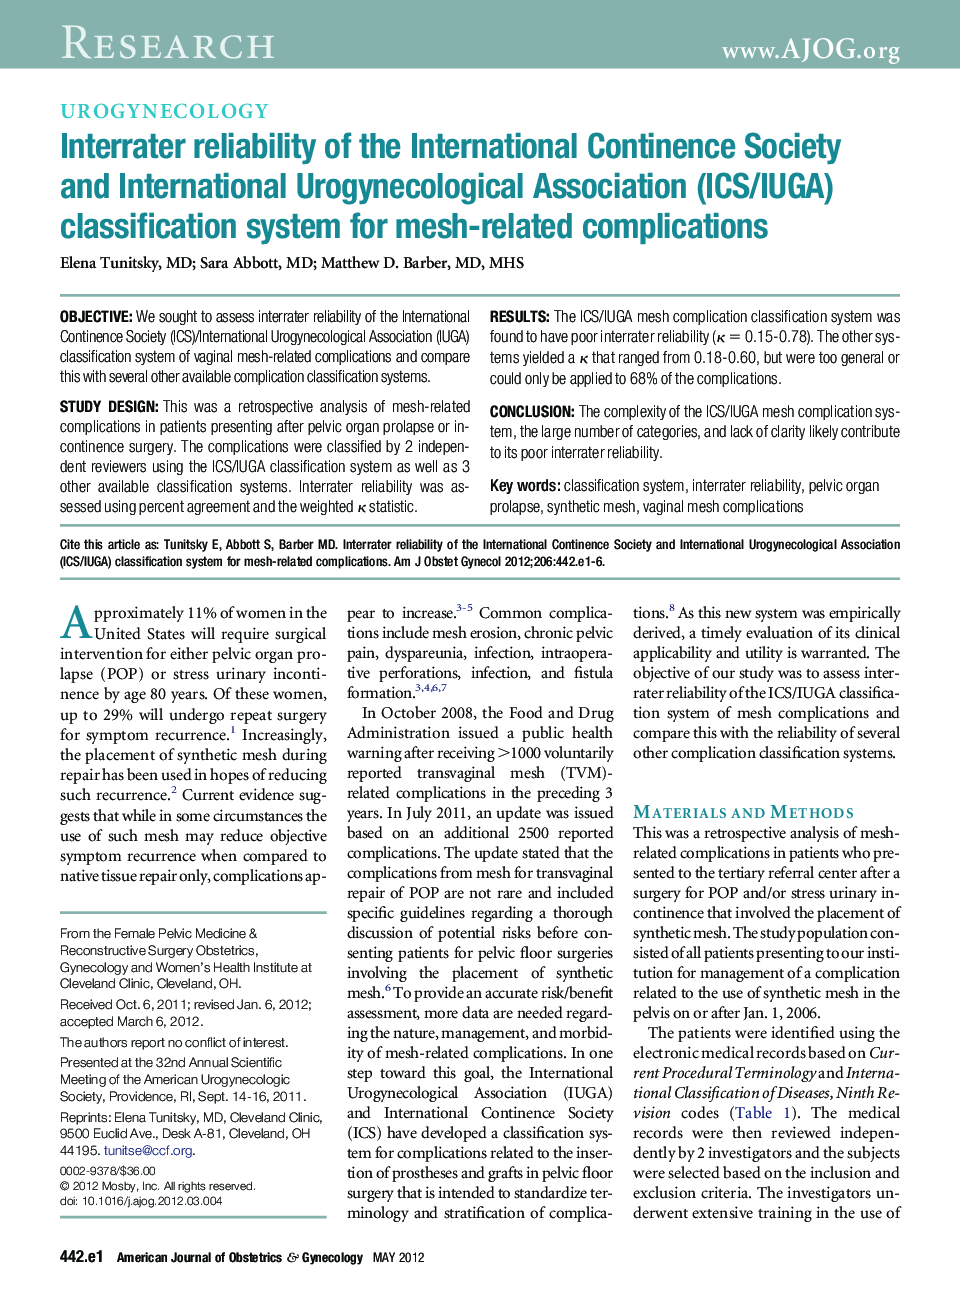 Interrater reliability of the International Continence Society and International Urogynecological Association (ICS/IUGA) classification system for mesh-related complications